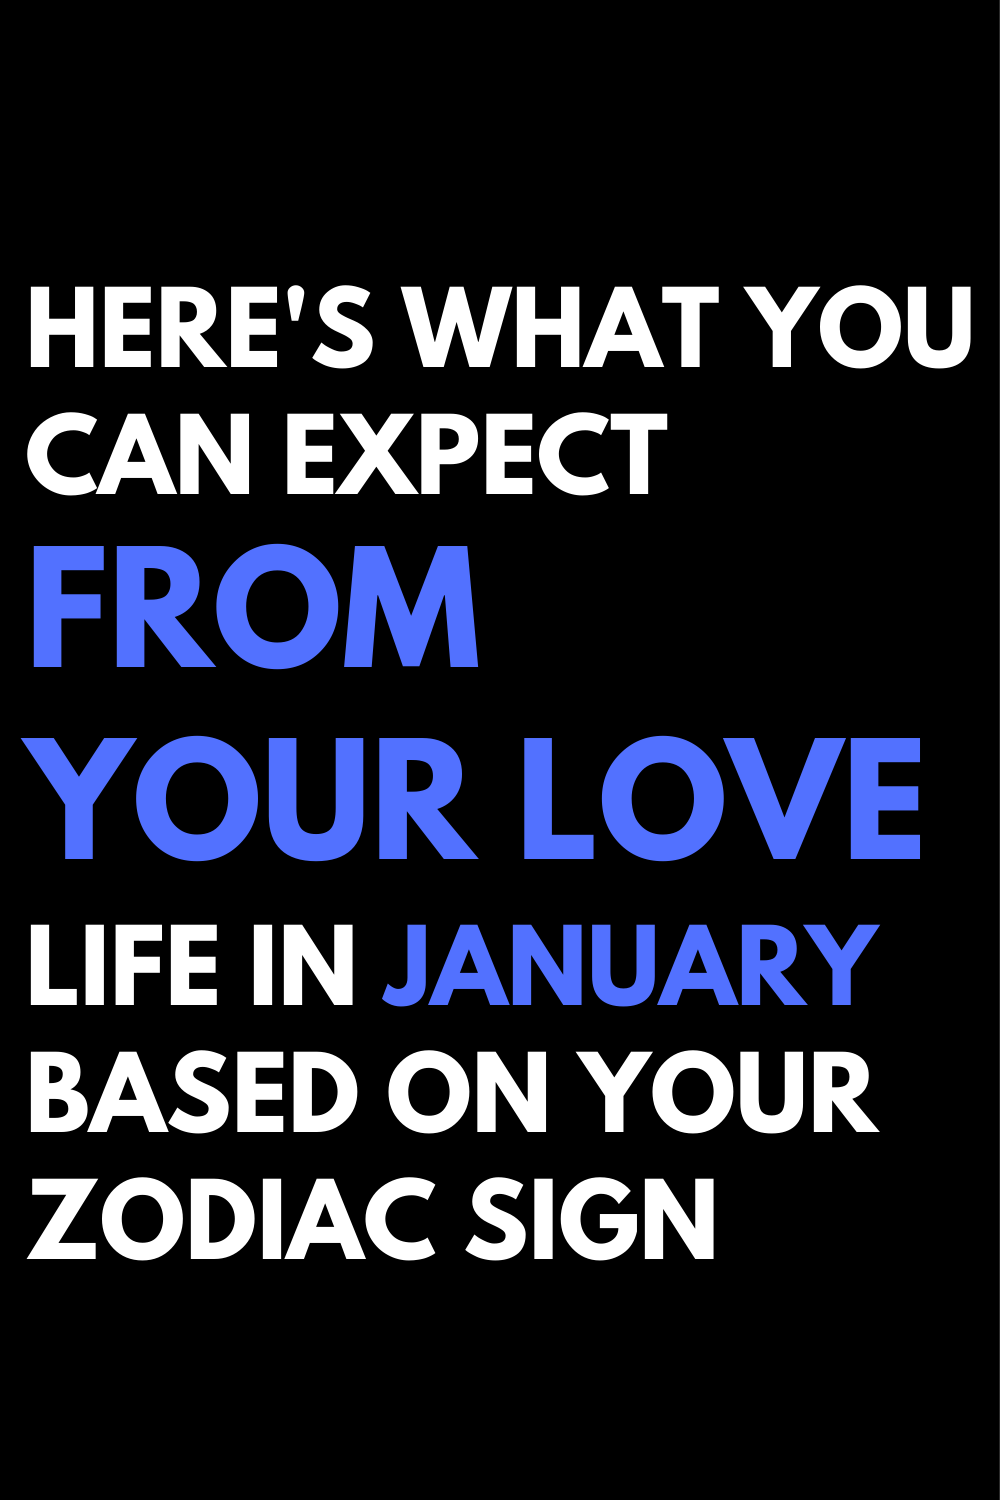 Here's What You Can Expect From Your Love Life In January Based On Your Zodiac Sign